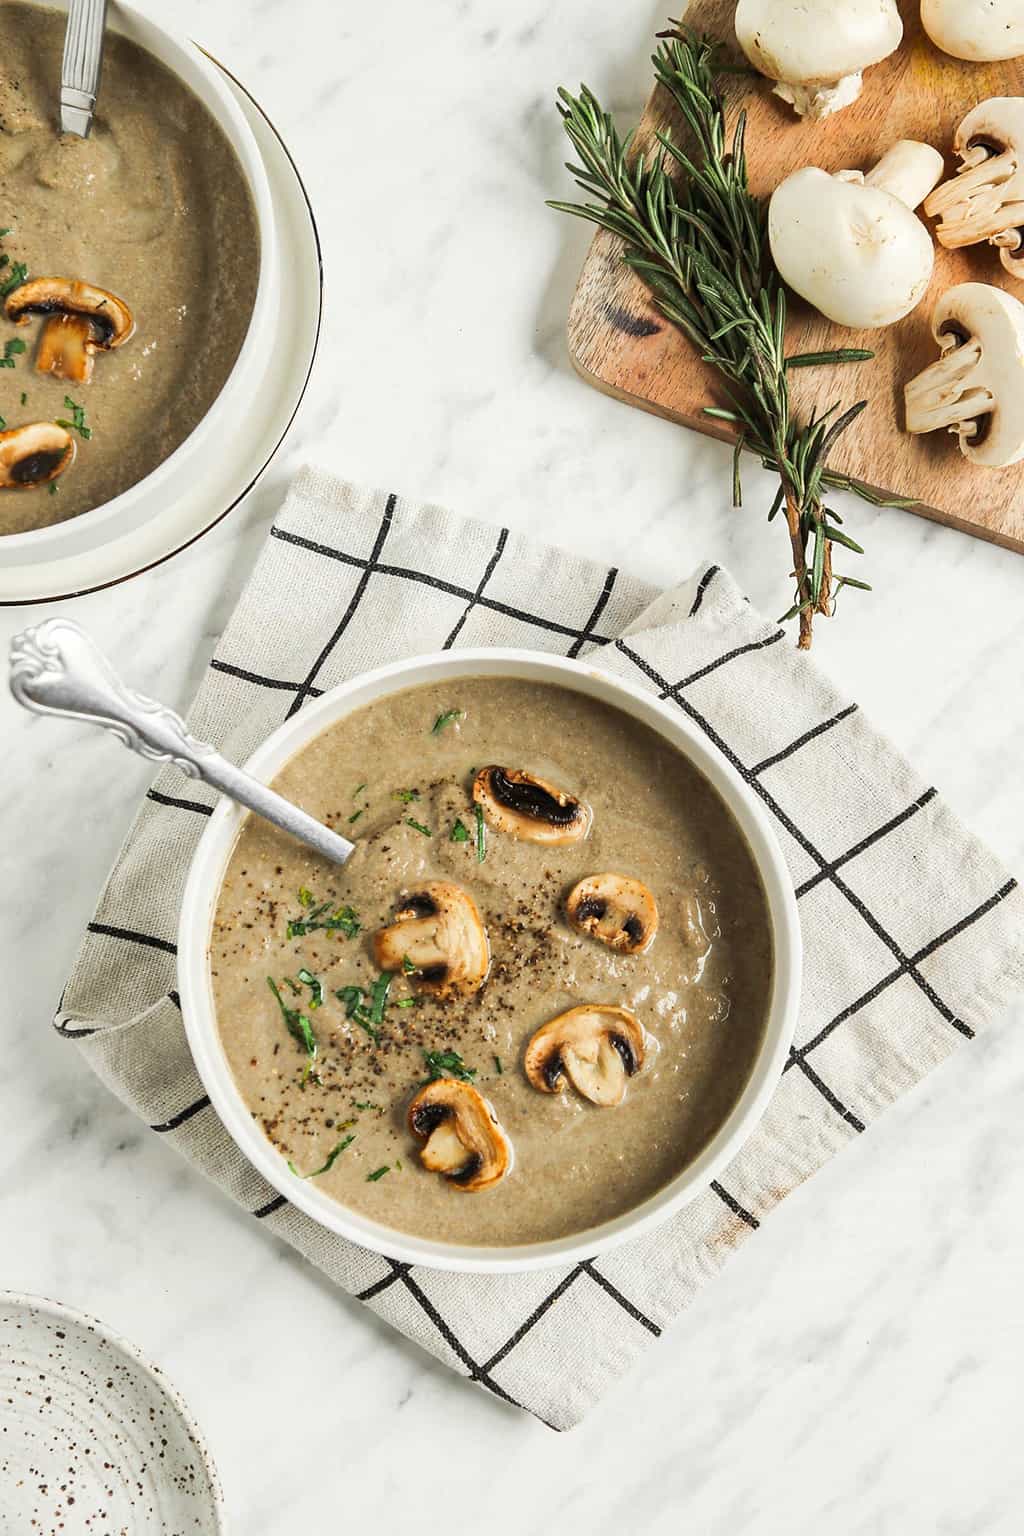 two bowls of vegan mushroom creamy soup with whole mushrooms, salt, pepper, and fresh herbs on top. Served with a spoon and checked linens. 